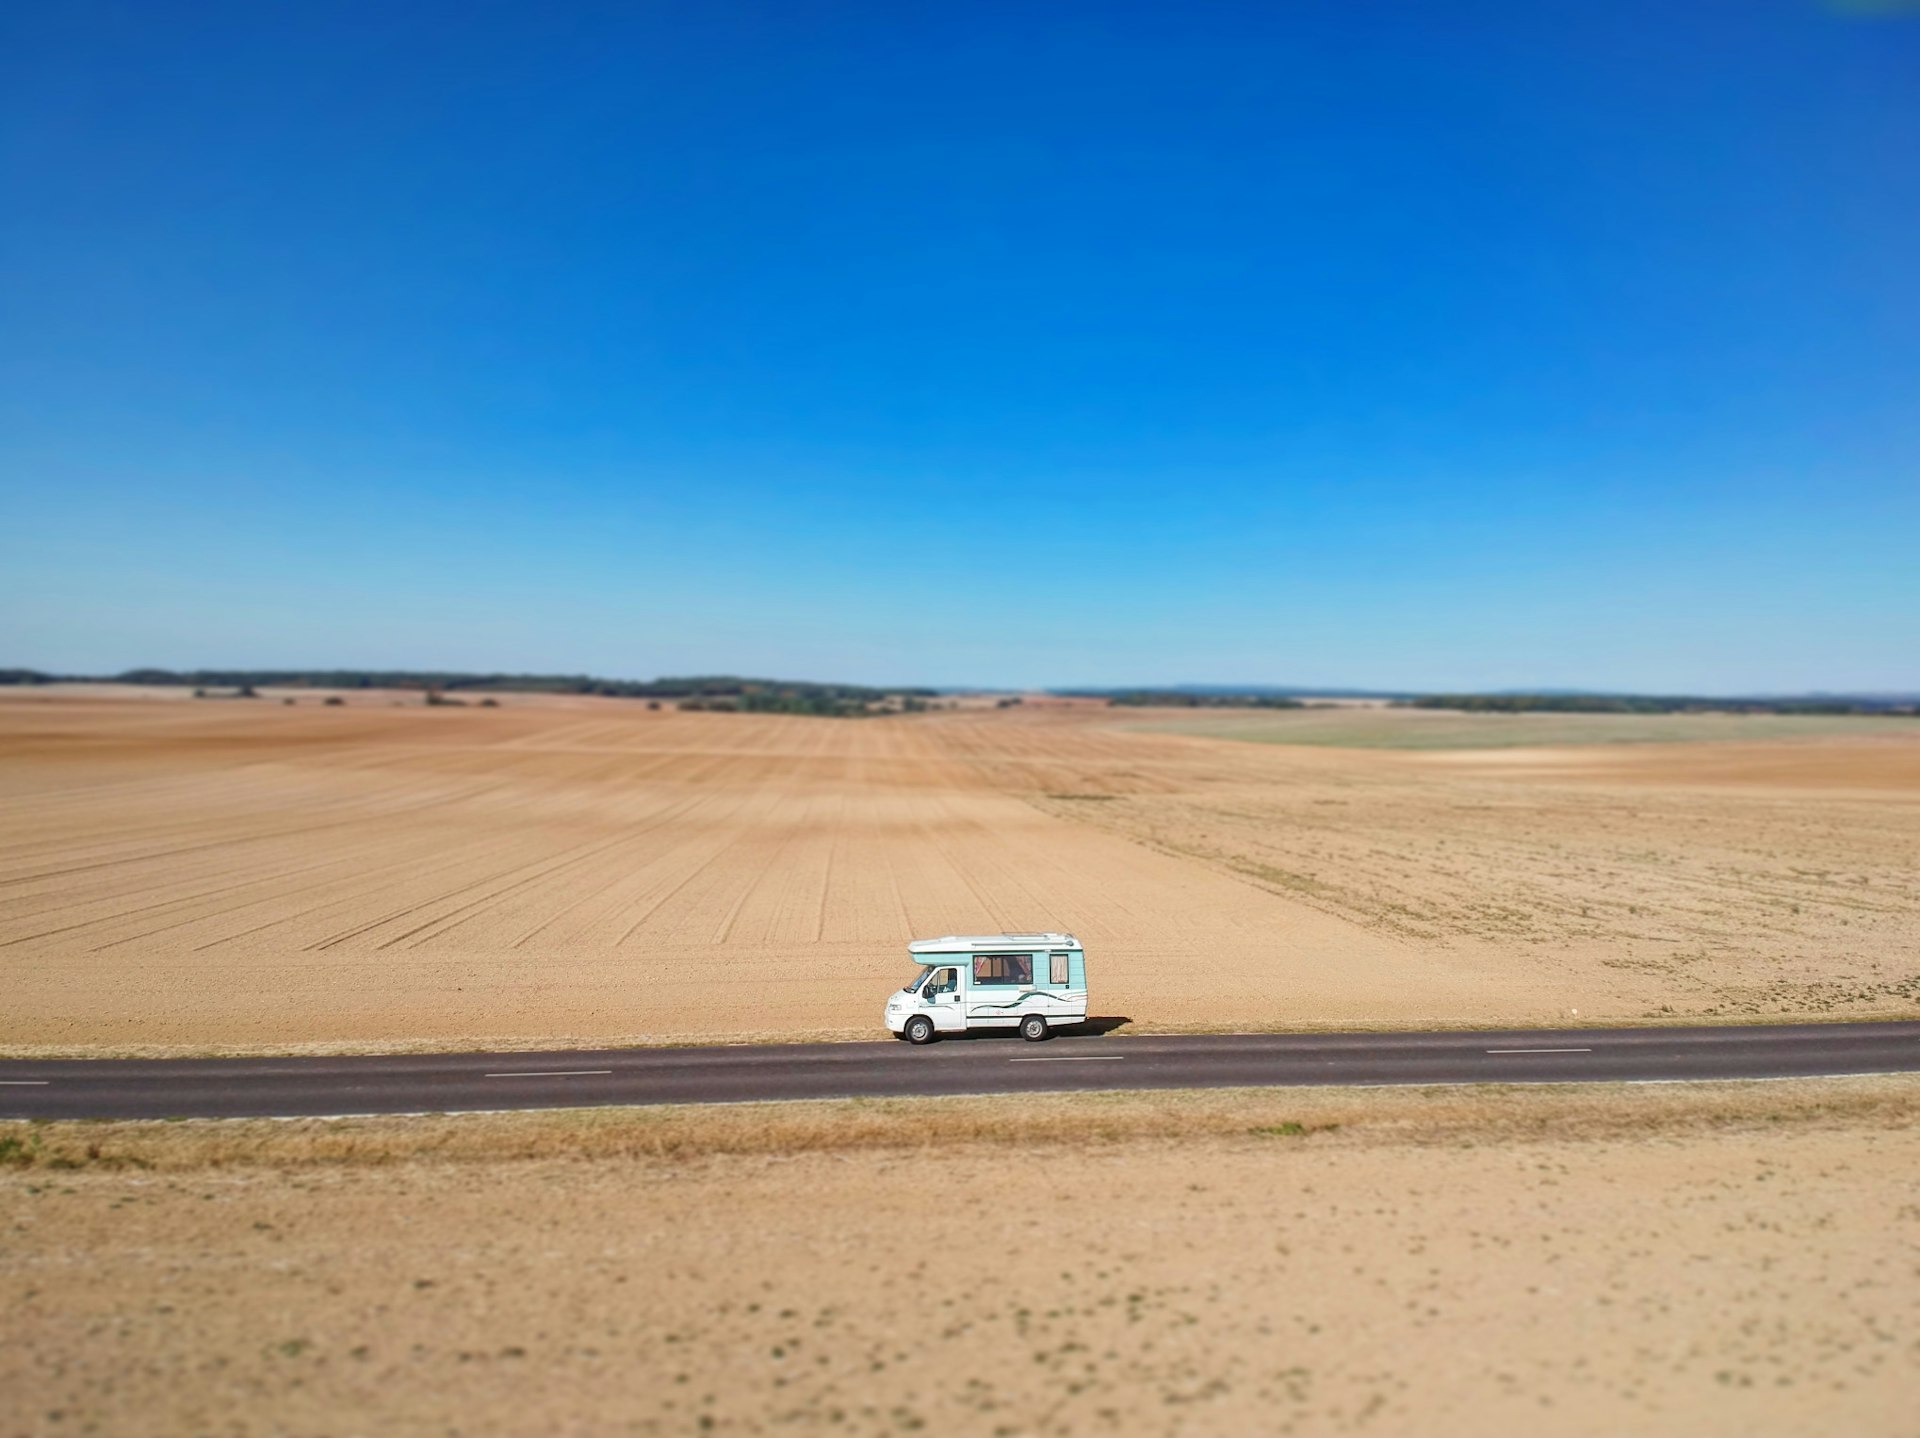 An aerial view of a campervan driving through a dry landscape